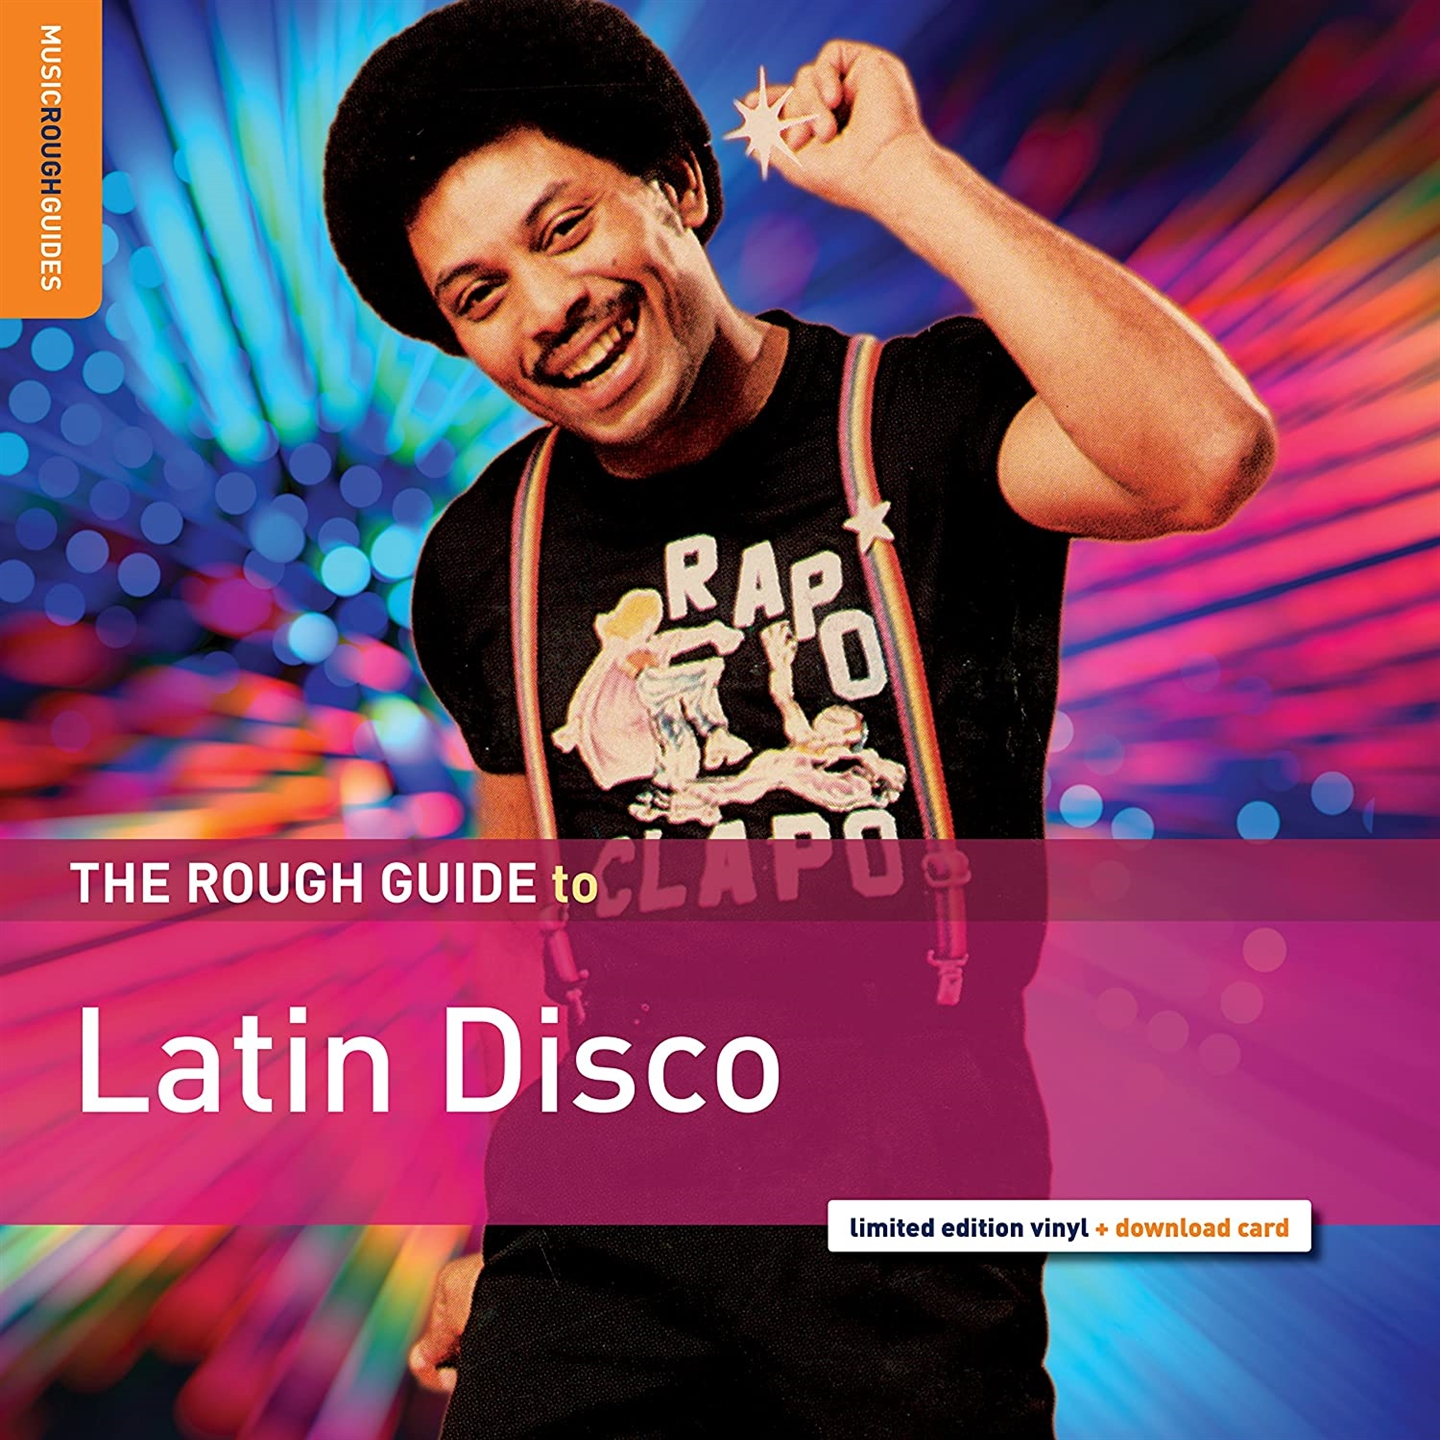 THE ROUGH GUIDE TO LATIN DISCO [LP]